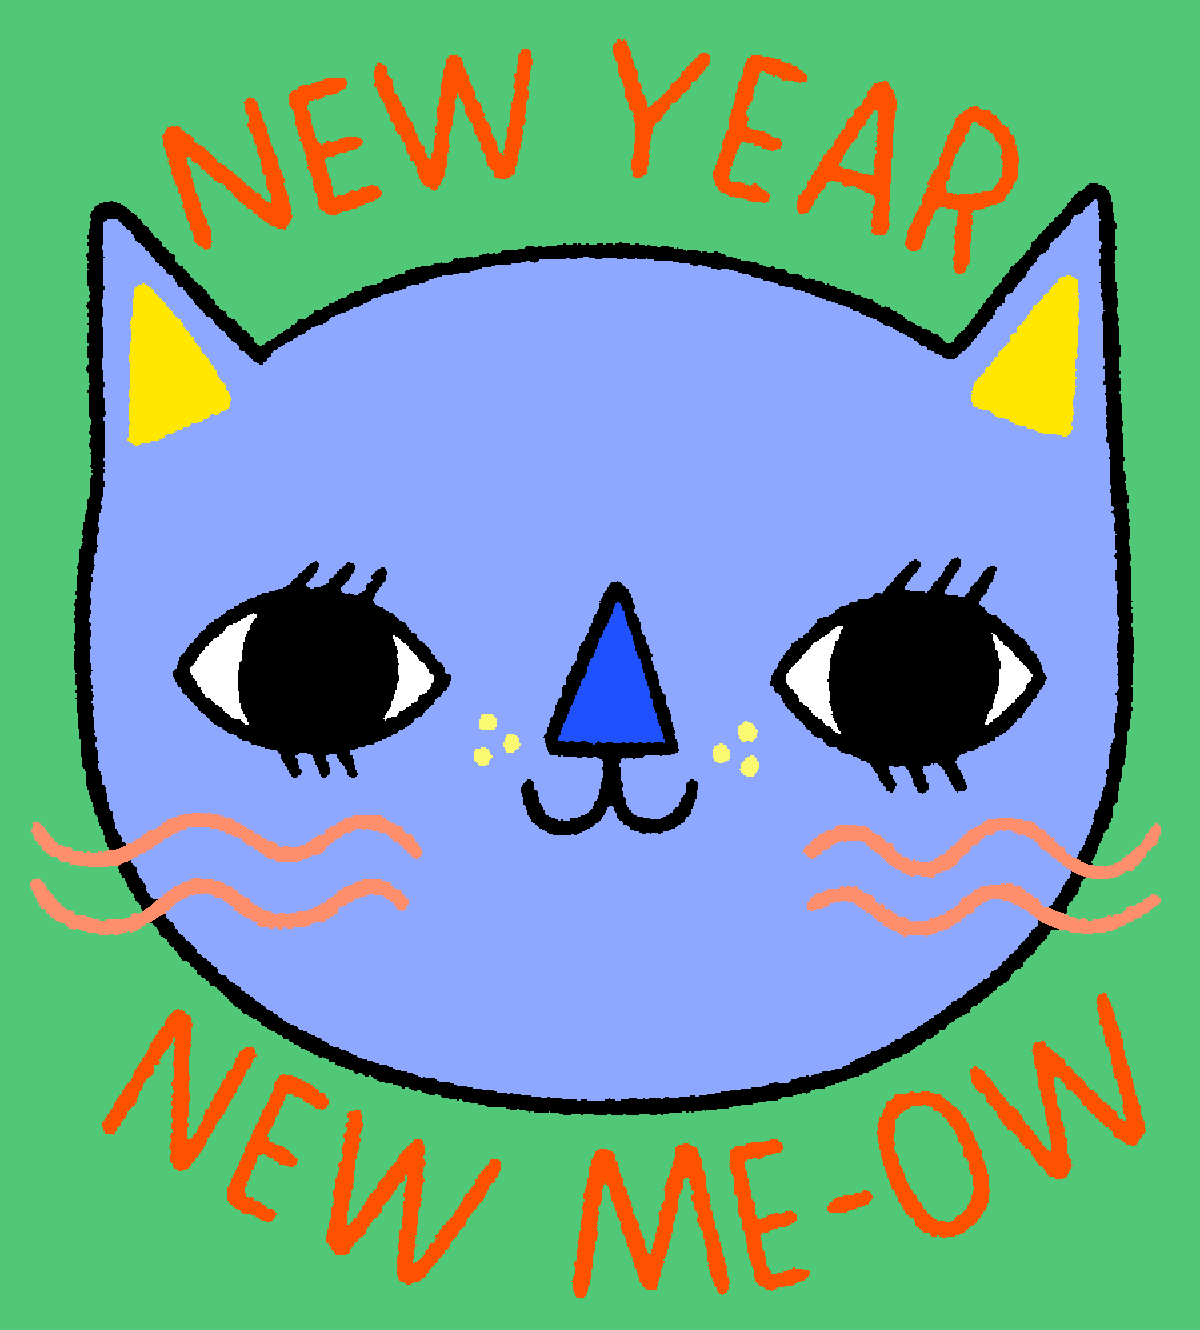 GIF: A blue cat blinks on a green background with the text "New Year, New Me-Ow"